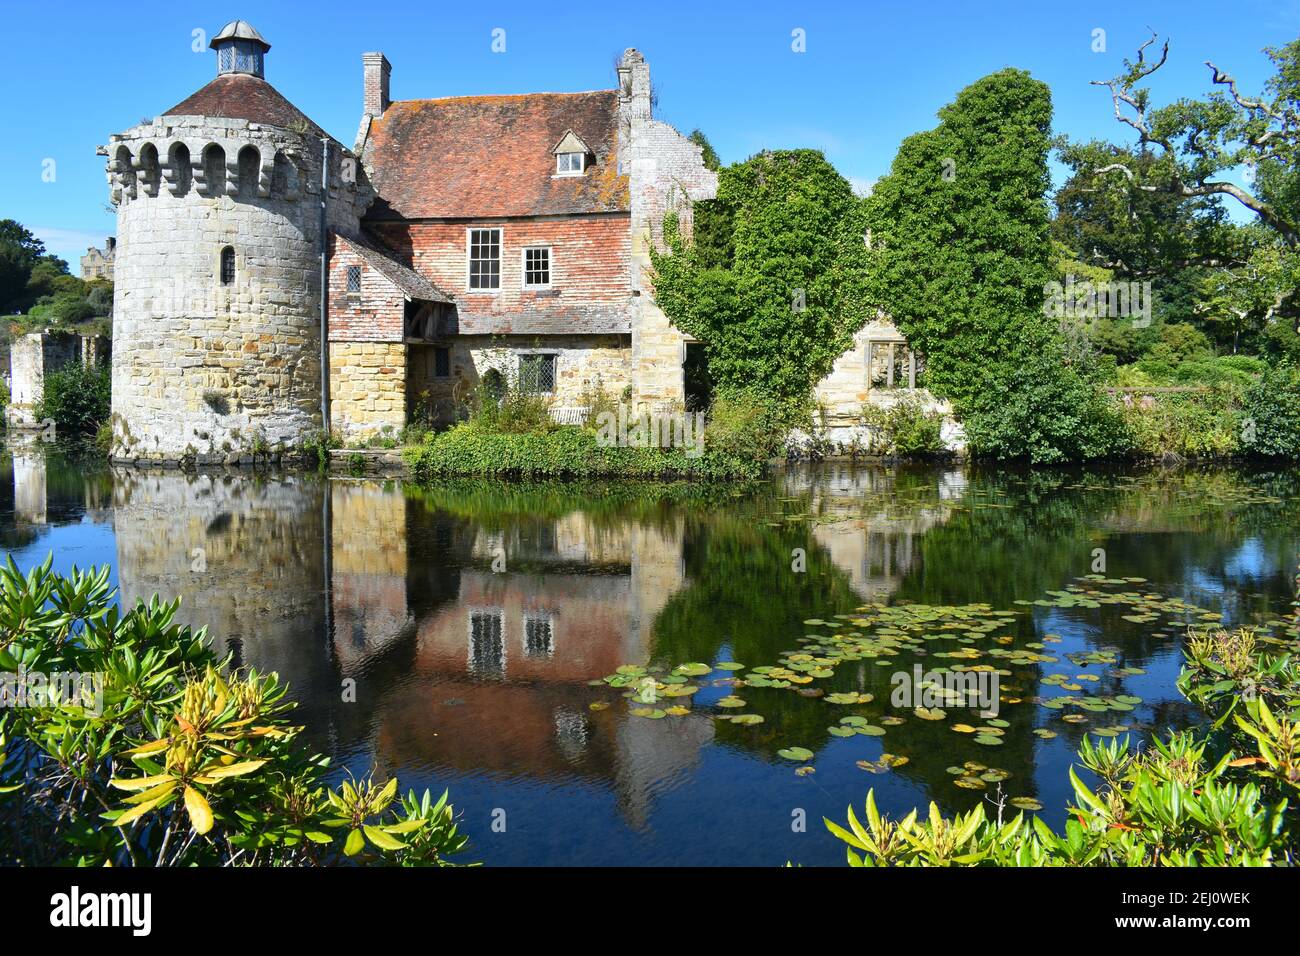 Centuries old British medieval castle facade amongst lush greenery with its reflection in water It includes tower residential buildings estates office Stock Photo